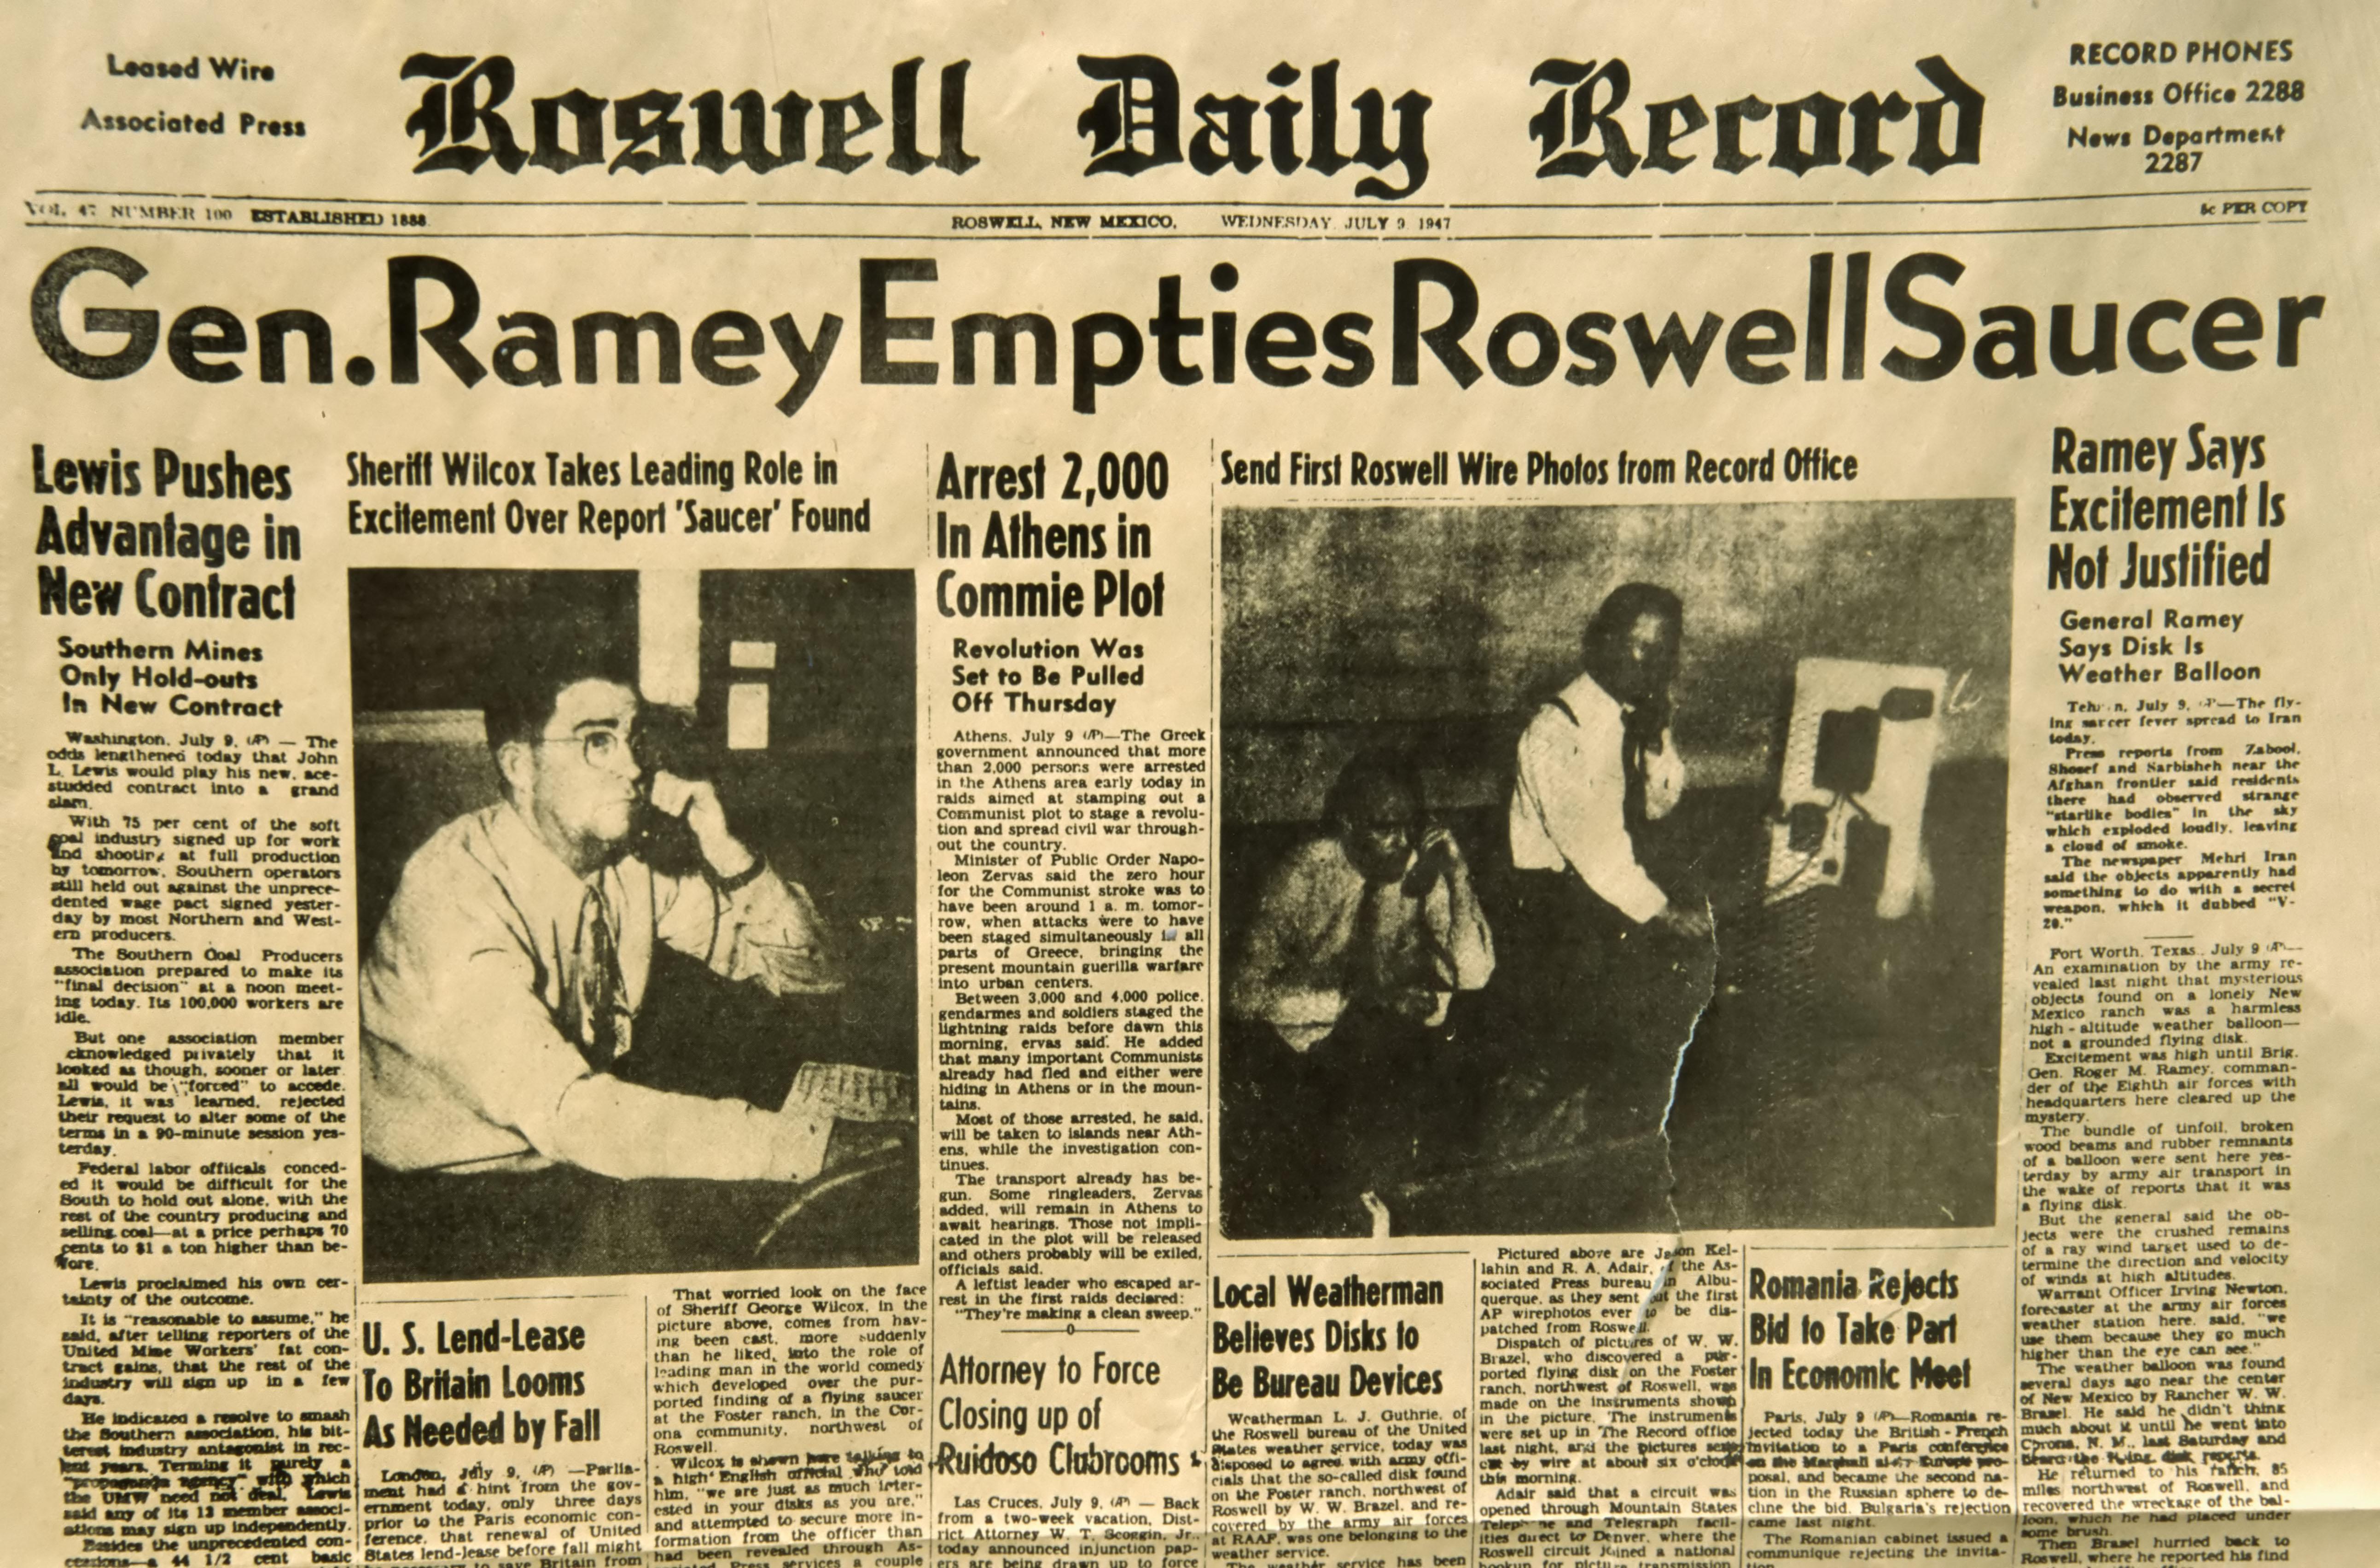 Headlines from the original front page of the Roswell Daily Record, reporting on flying-saucer crash near Roswell